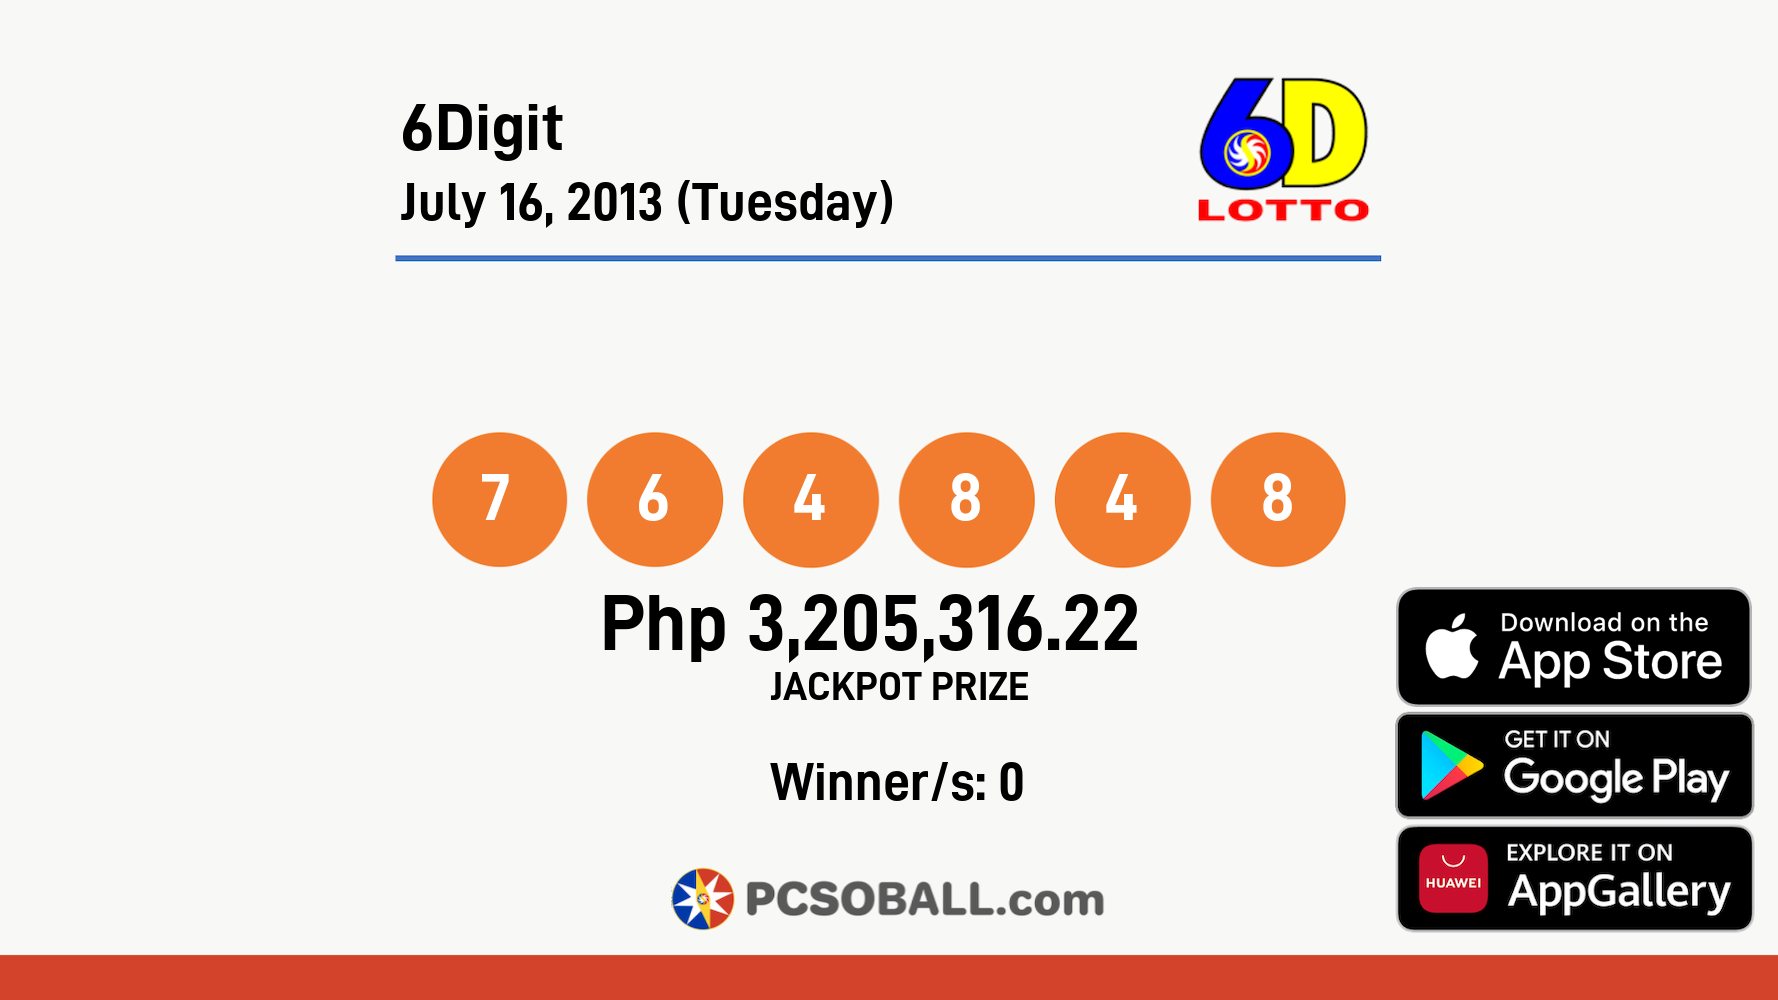 6Digit July 16, 2013 (Tuesday) Result